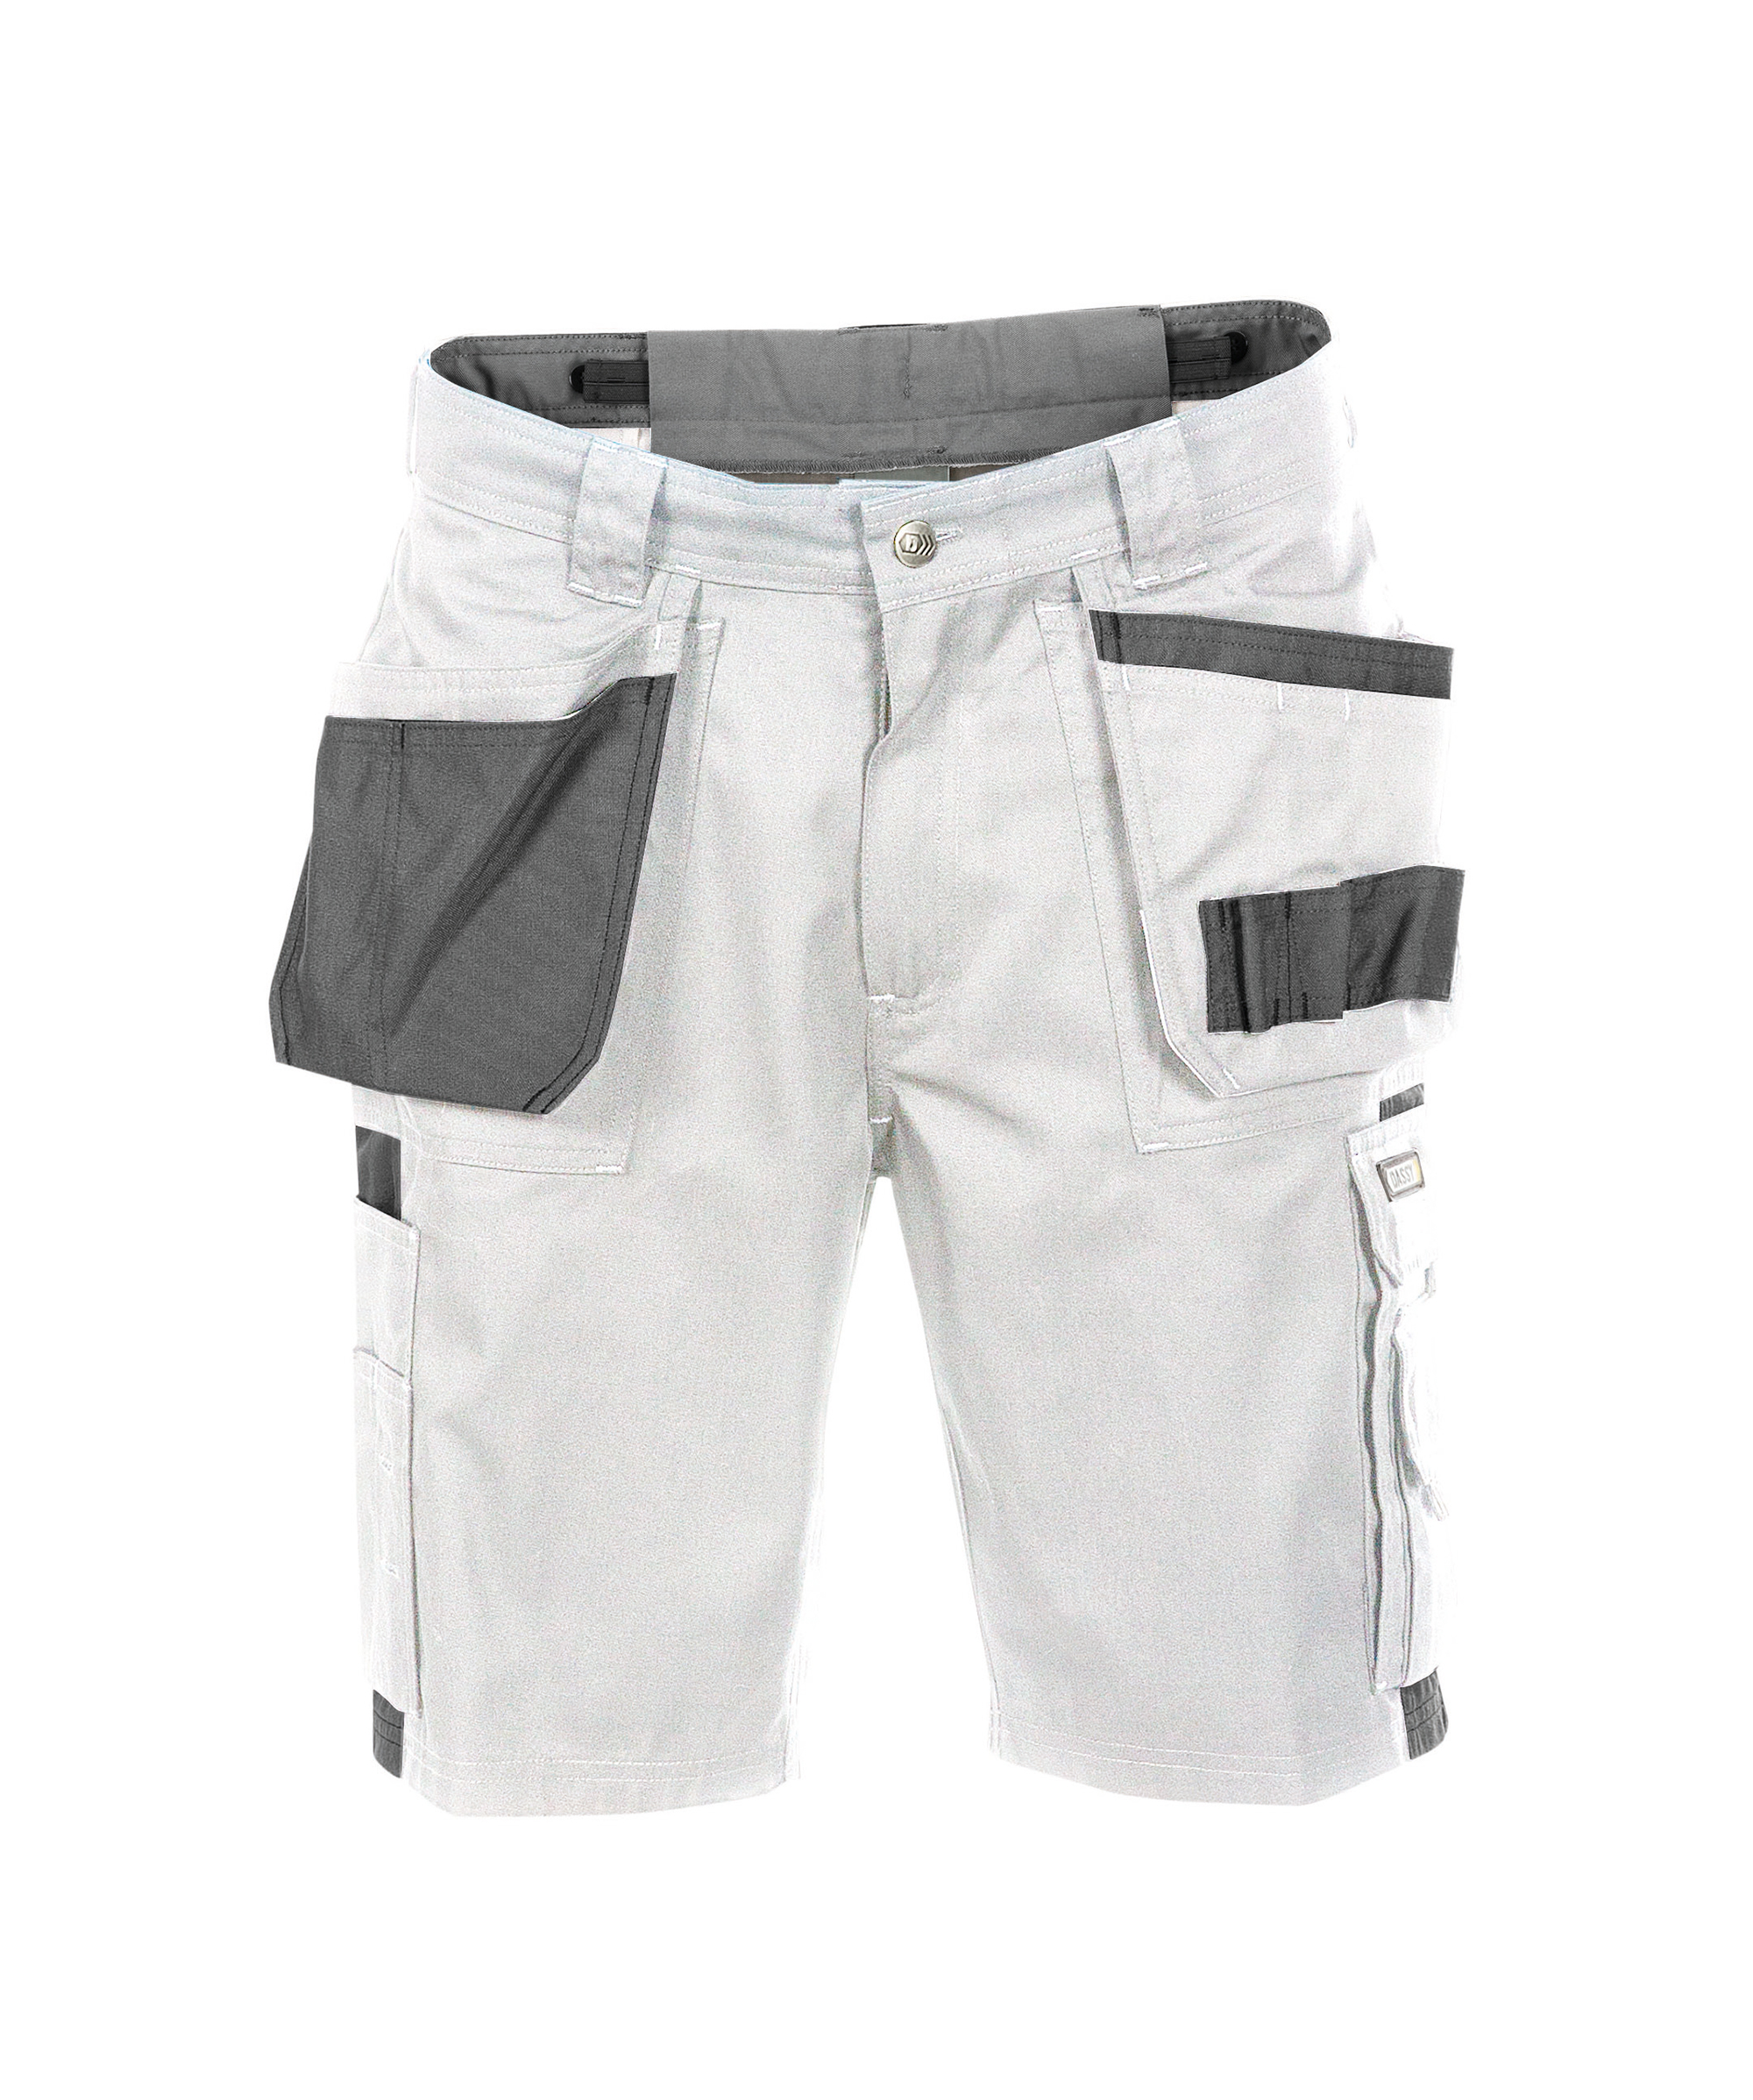 monza_two-tone-work-shorts-with-multi-pockets_white-cement-grey_front.jpg